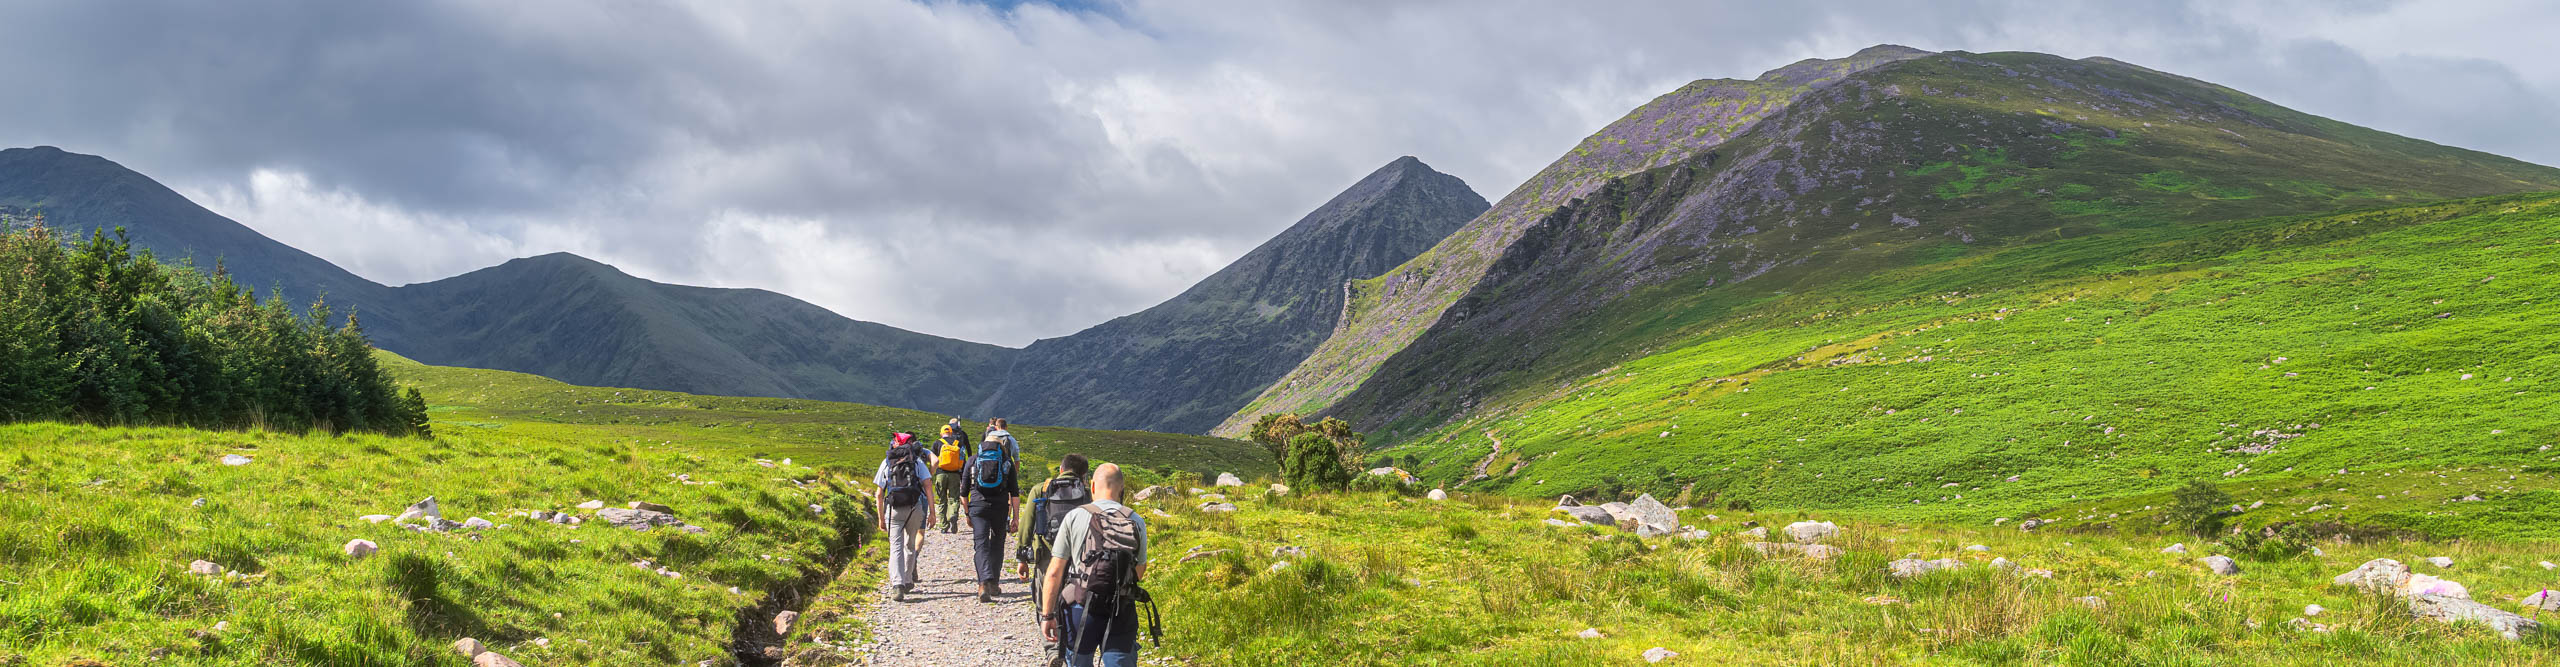 Group of hikers in Cronins Yard on the trail to Devils Ladder  Ireland Carrauntoohil, Ireland